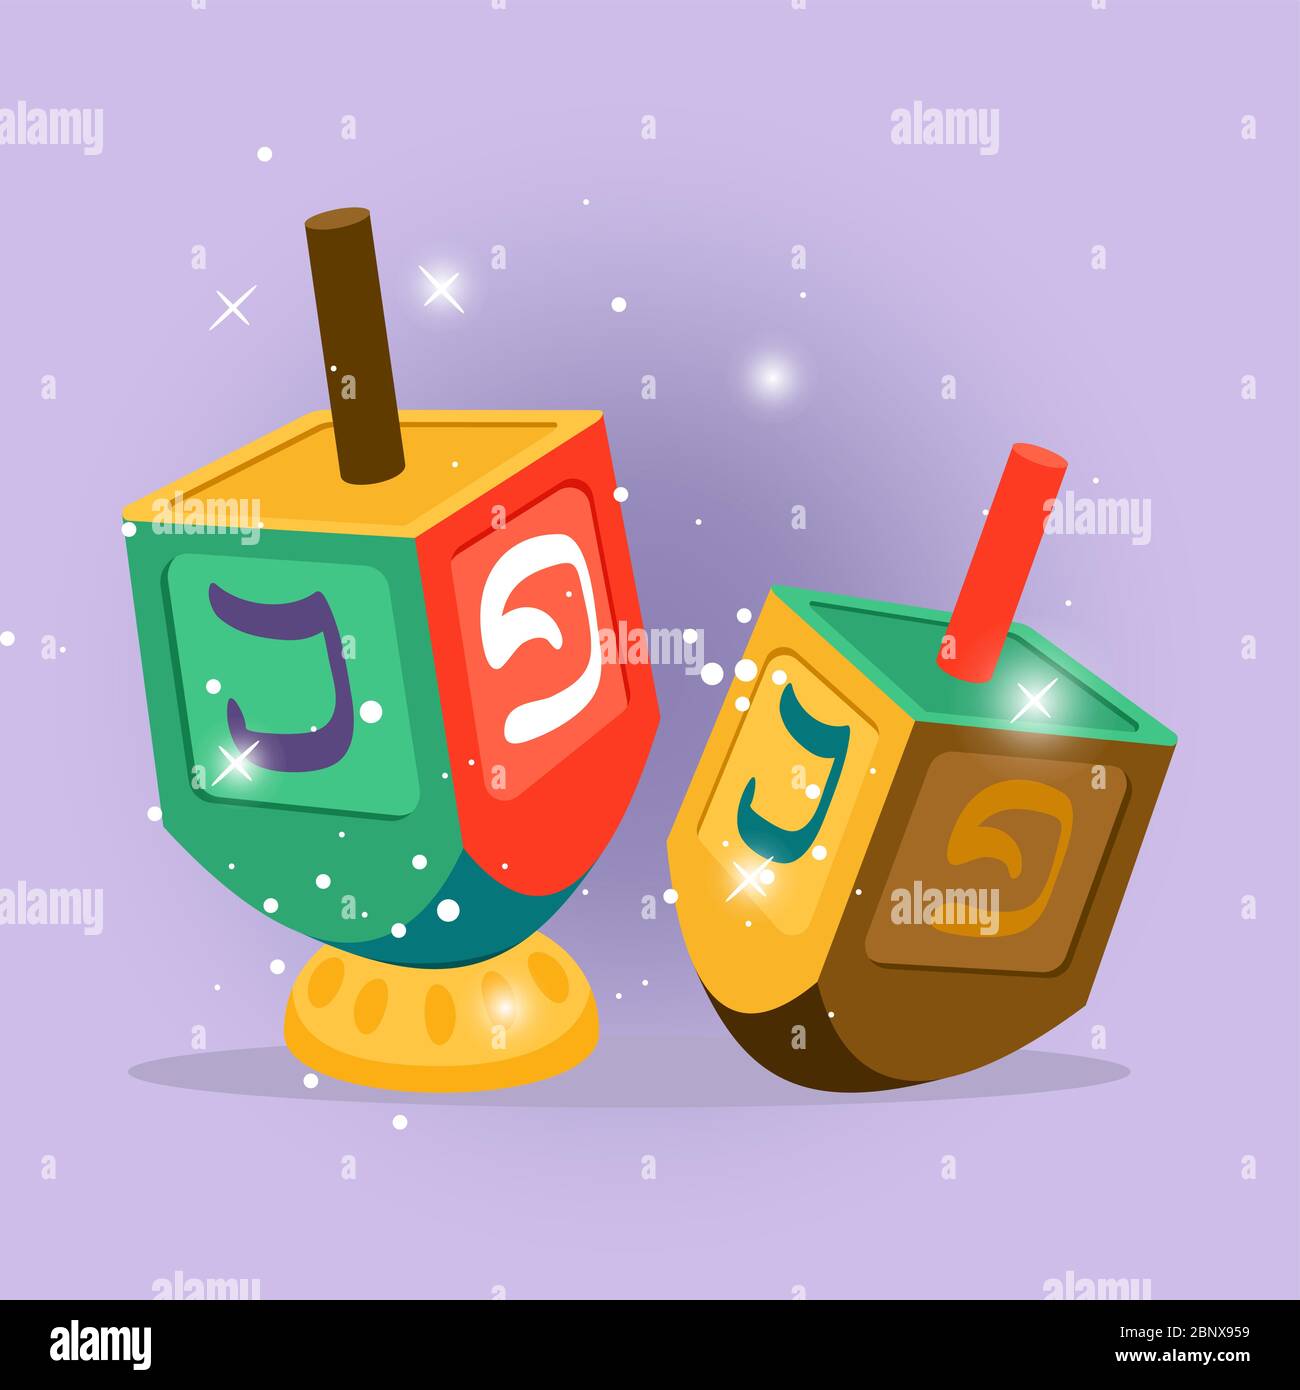 Hebrew vector cartoon illustration with shining elements on violet background Stock Vector